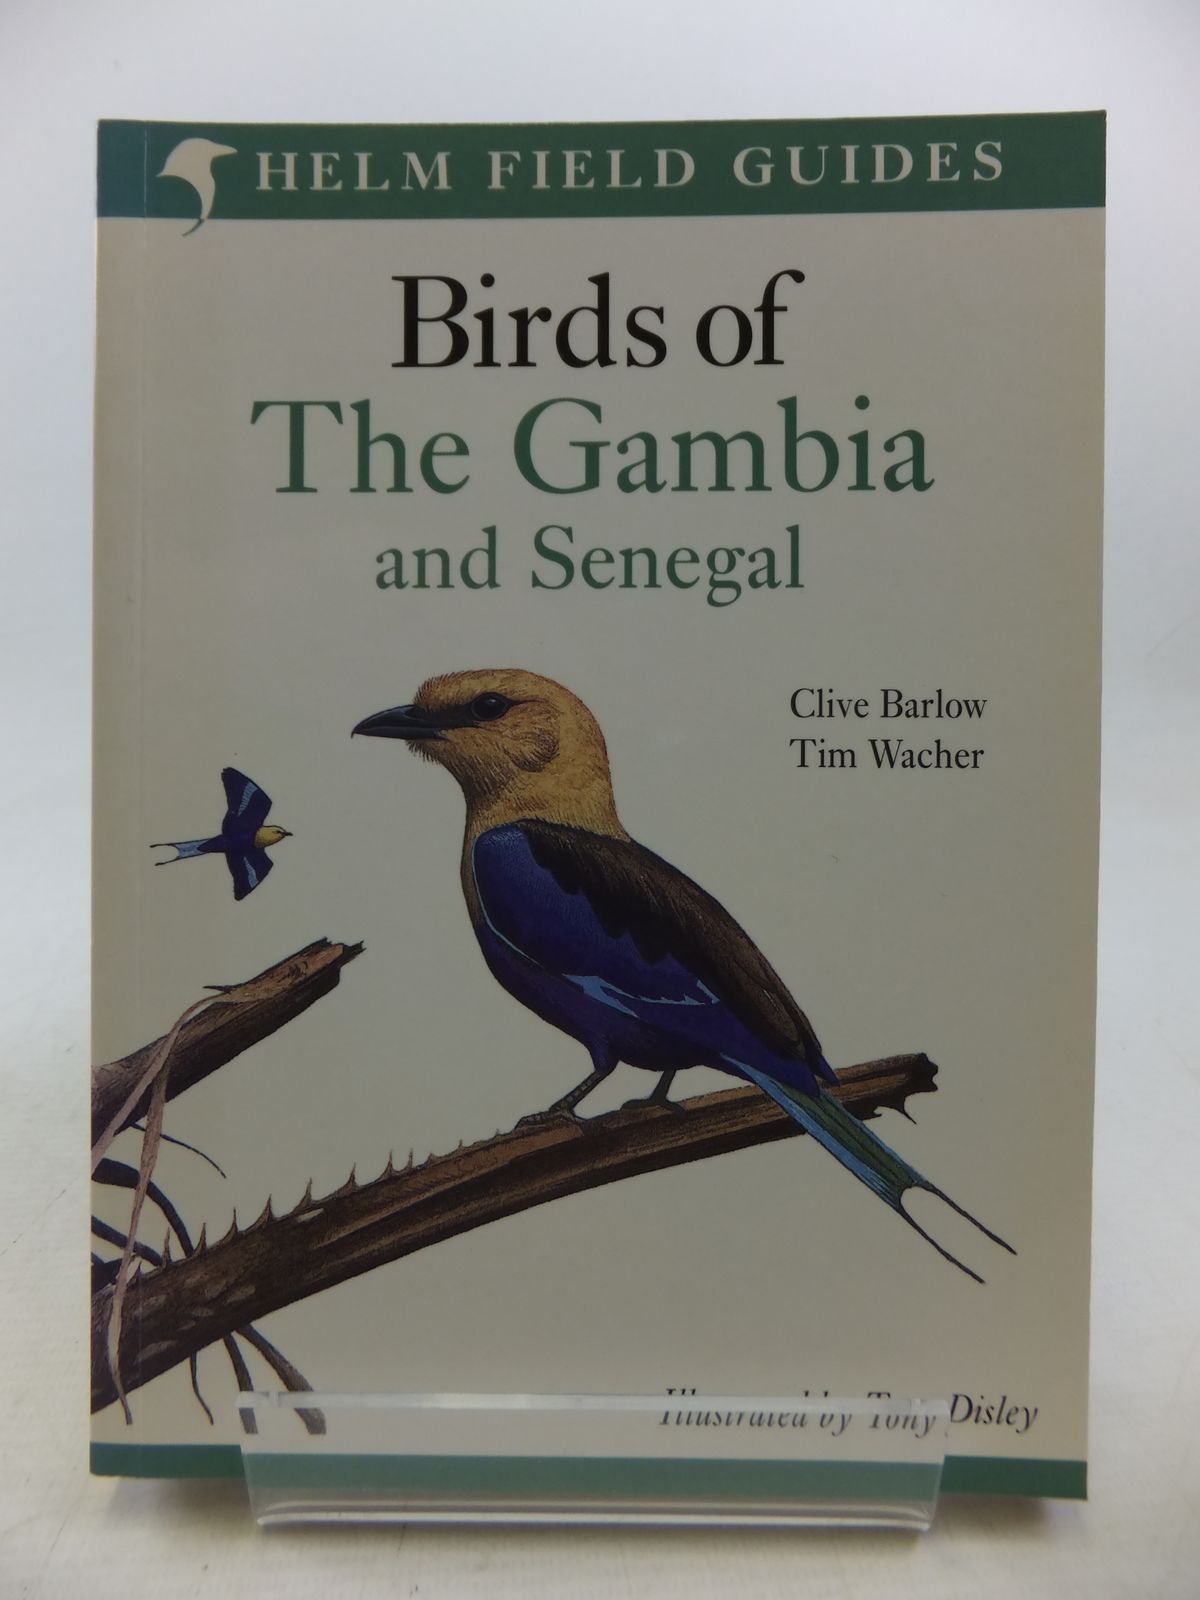 A Field Guide To The Birds Of The Gambia And Senegal